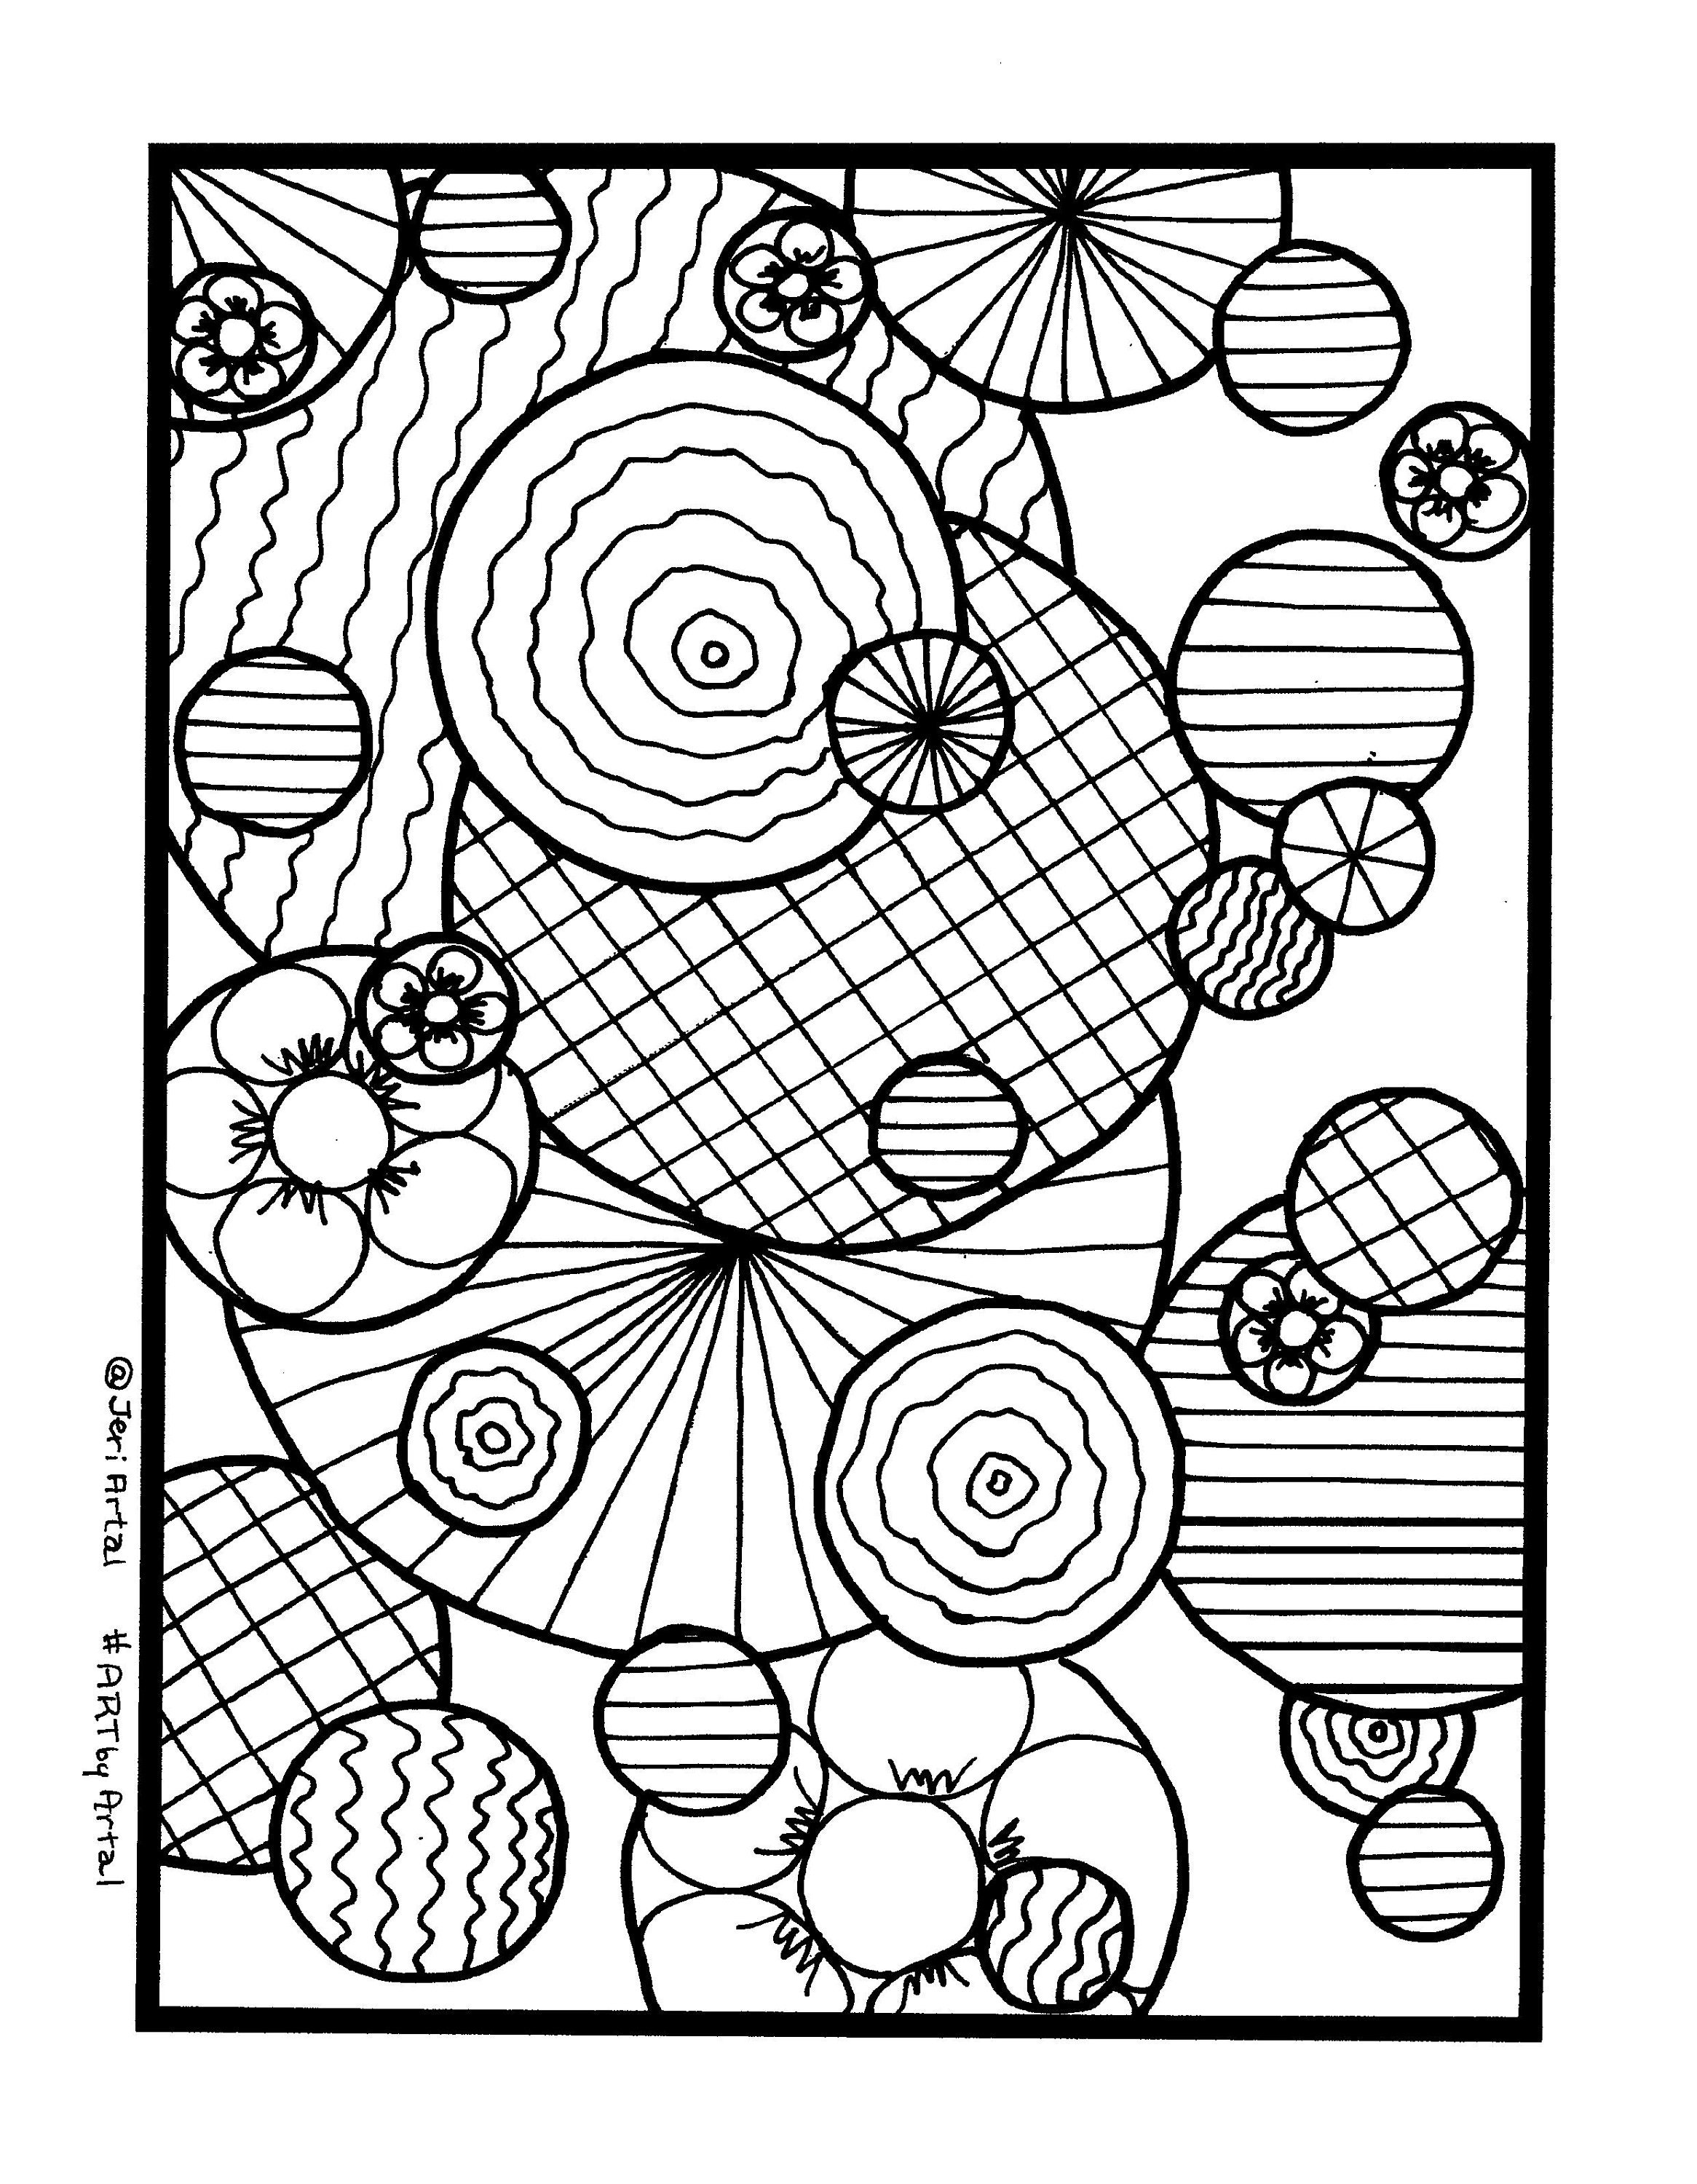  Mosquito Bites Odd Names To Call Your Boobies Adult Coloring  Book: Not So Horrible and Bad Words for Breasts and Female Chests to Color  with Mandala Patterns. Funny Gift for Adults